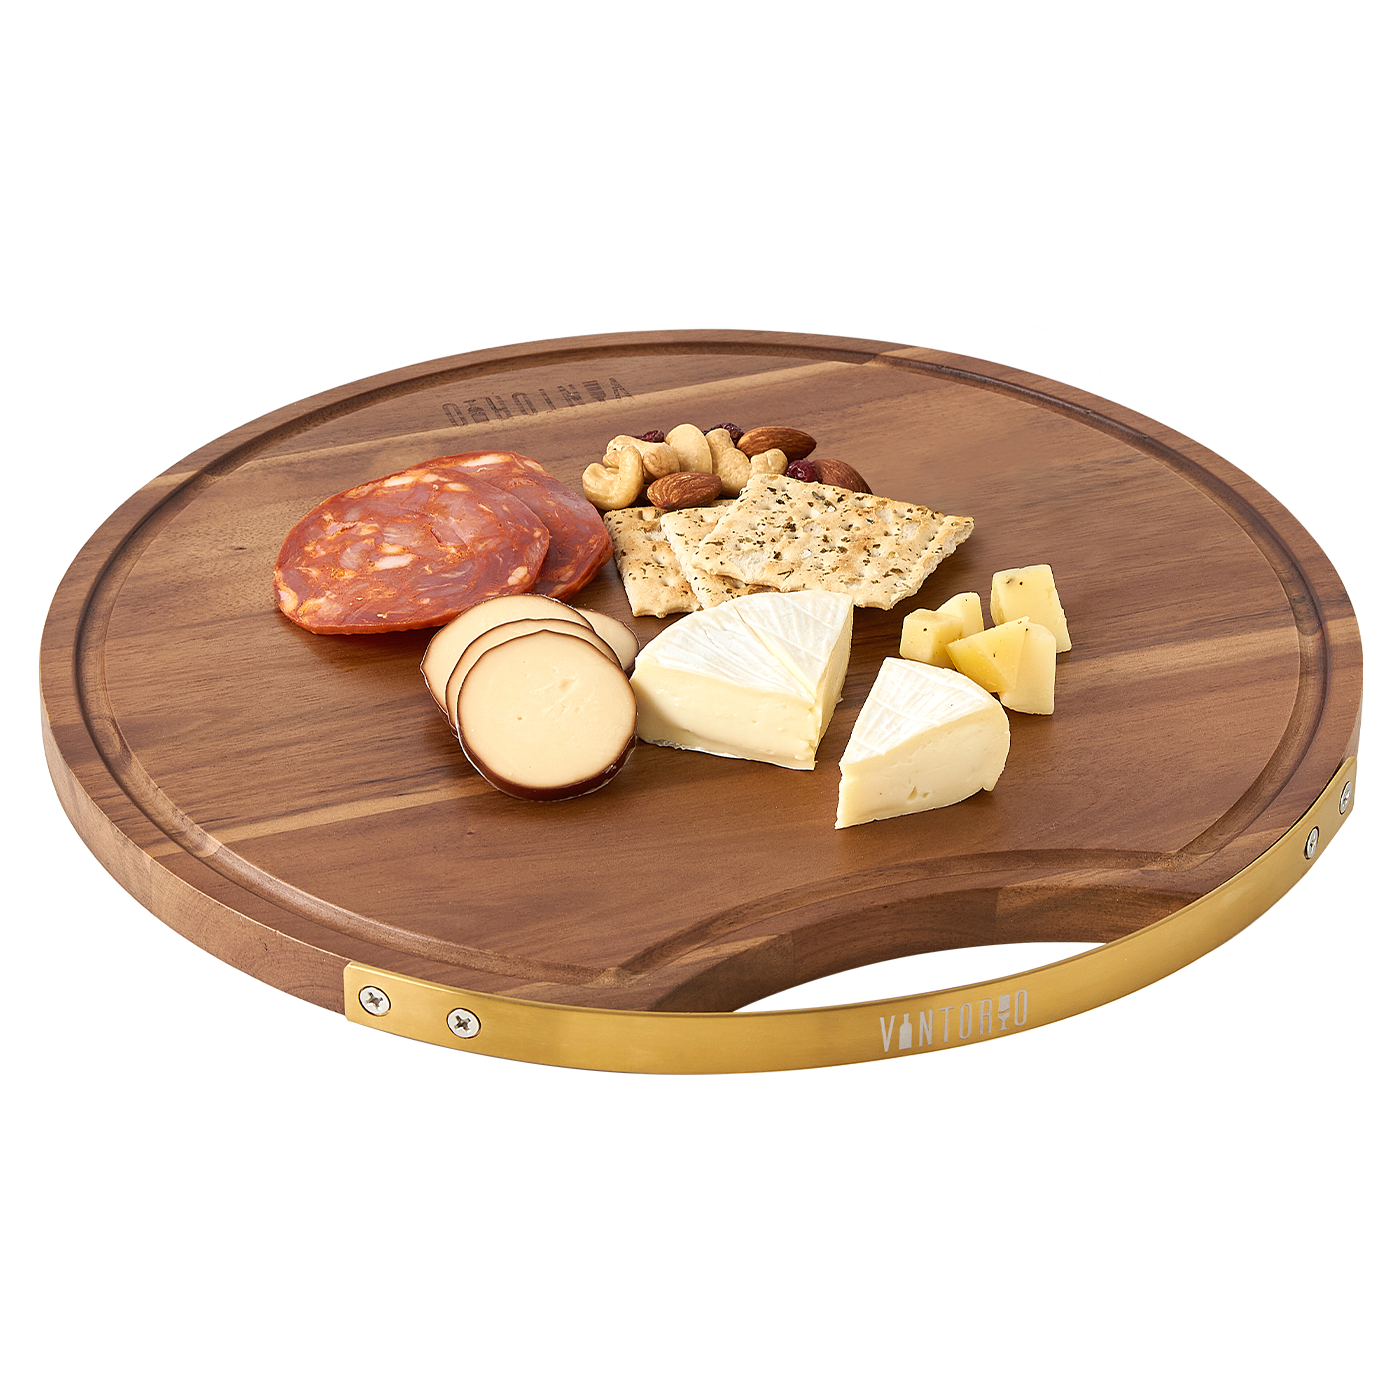 Vintorio Wooden Cheese Board with Charcuterie and Crackers